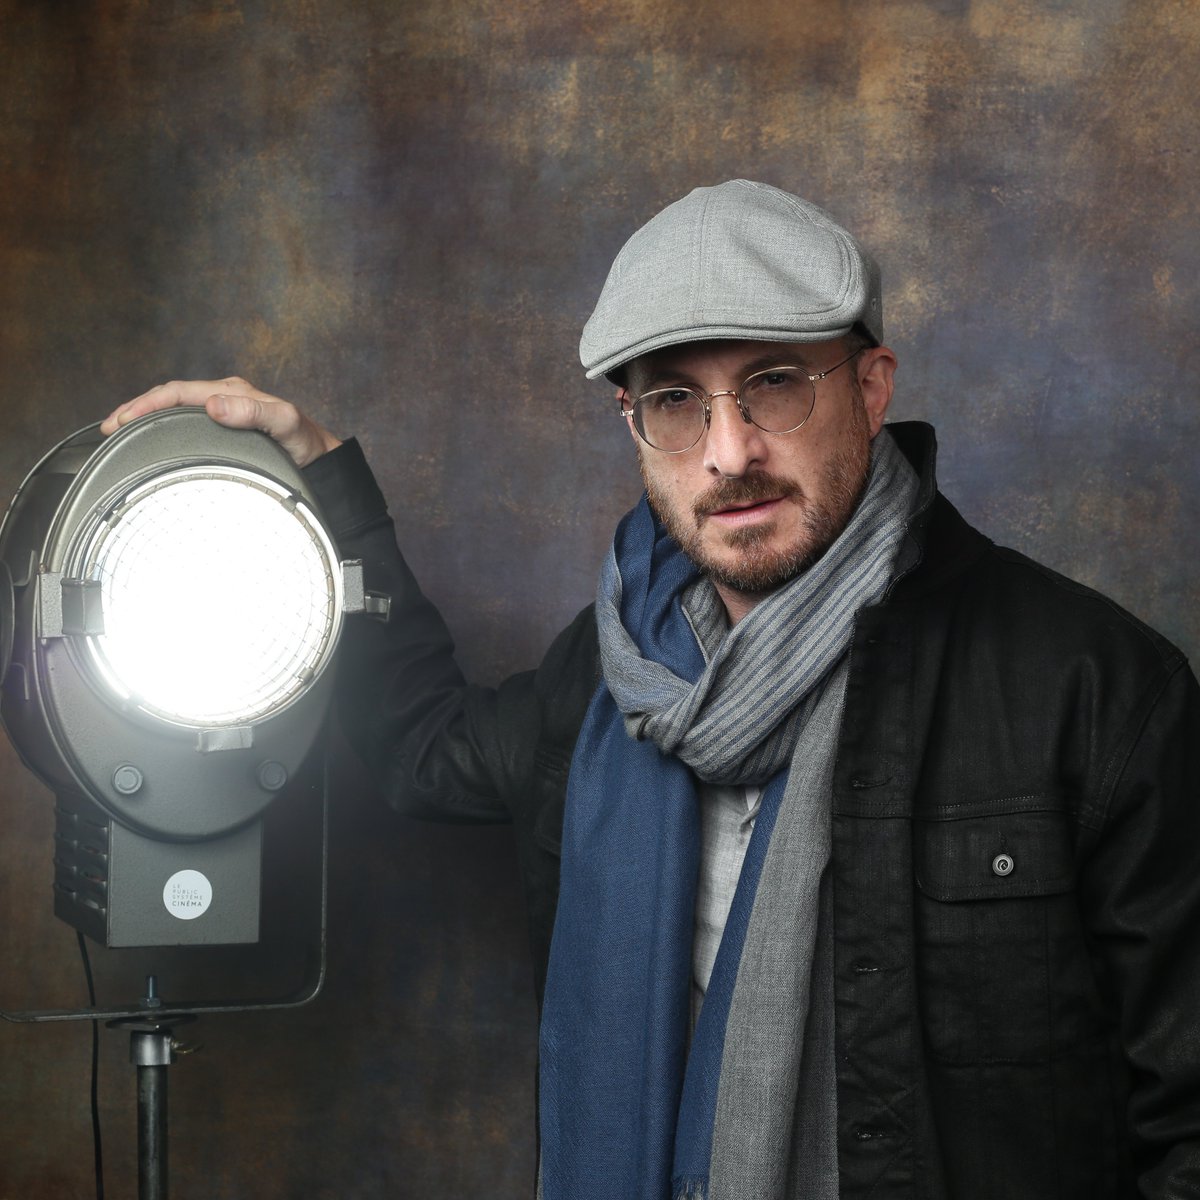 Darren Aronofski is photographed by @olivier_vigerie for his tribute in the American Film Festival in Deauville, France